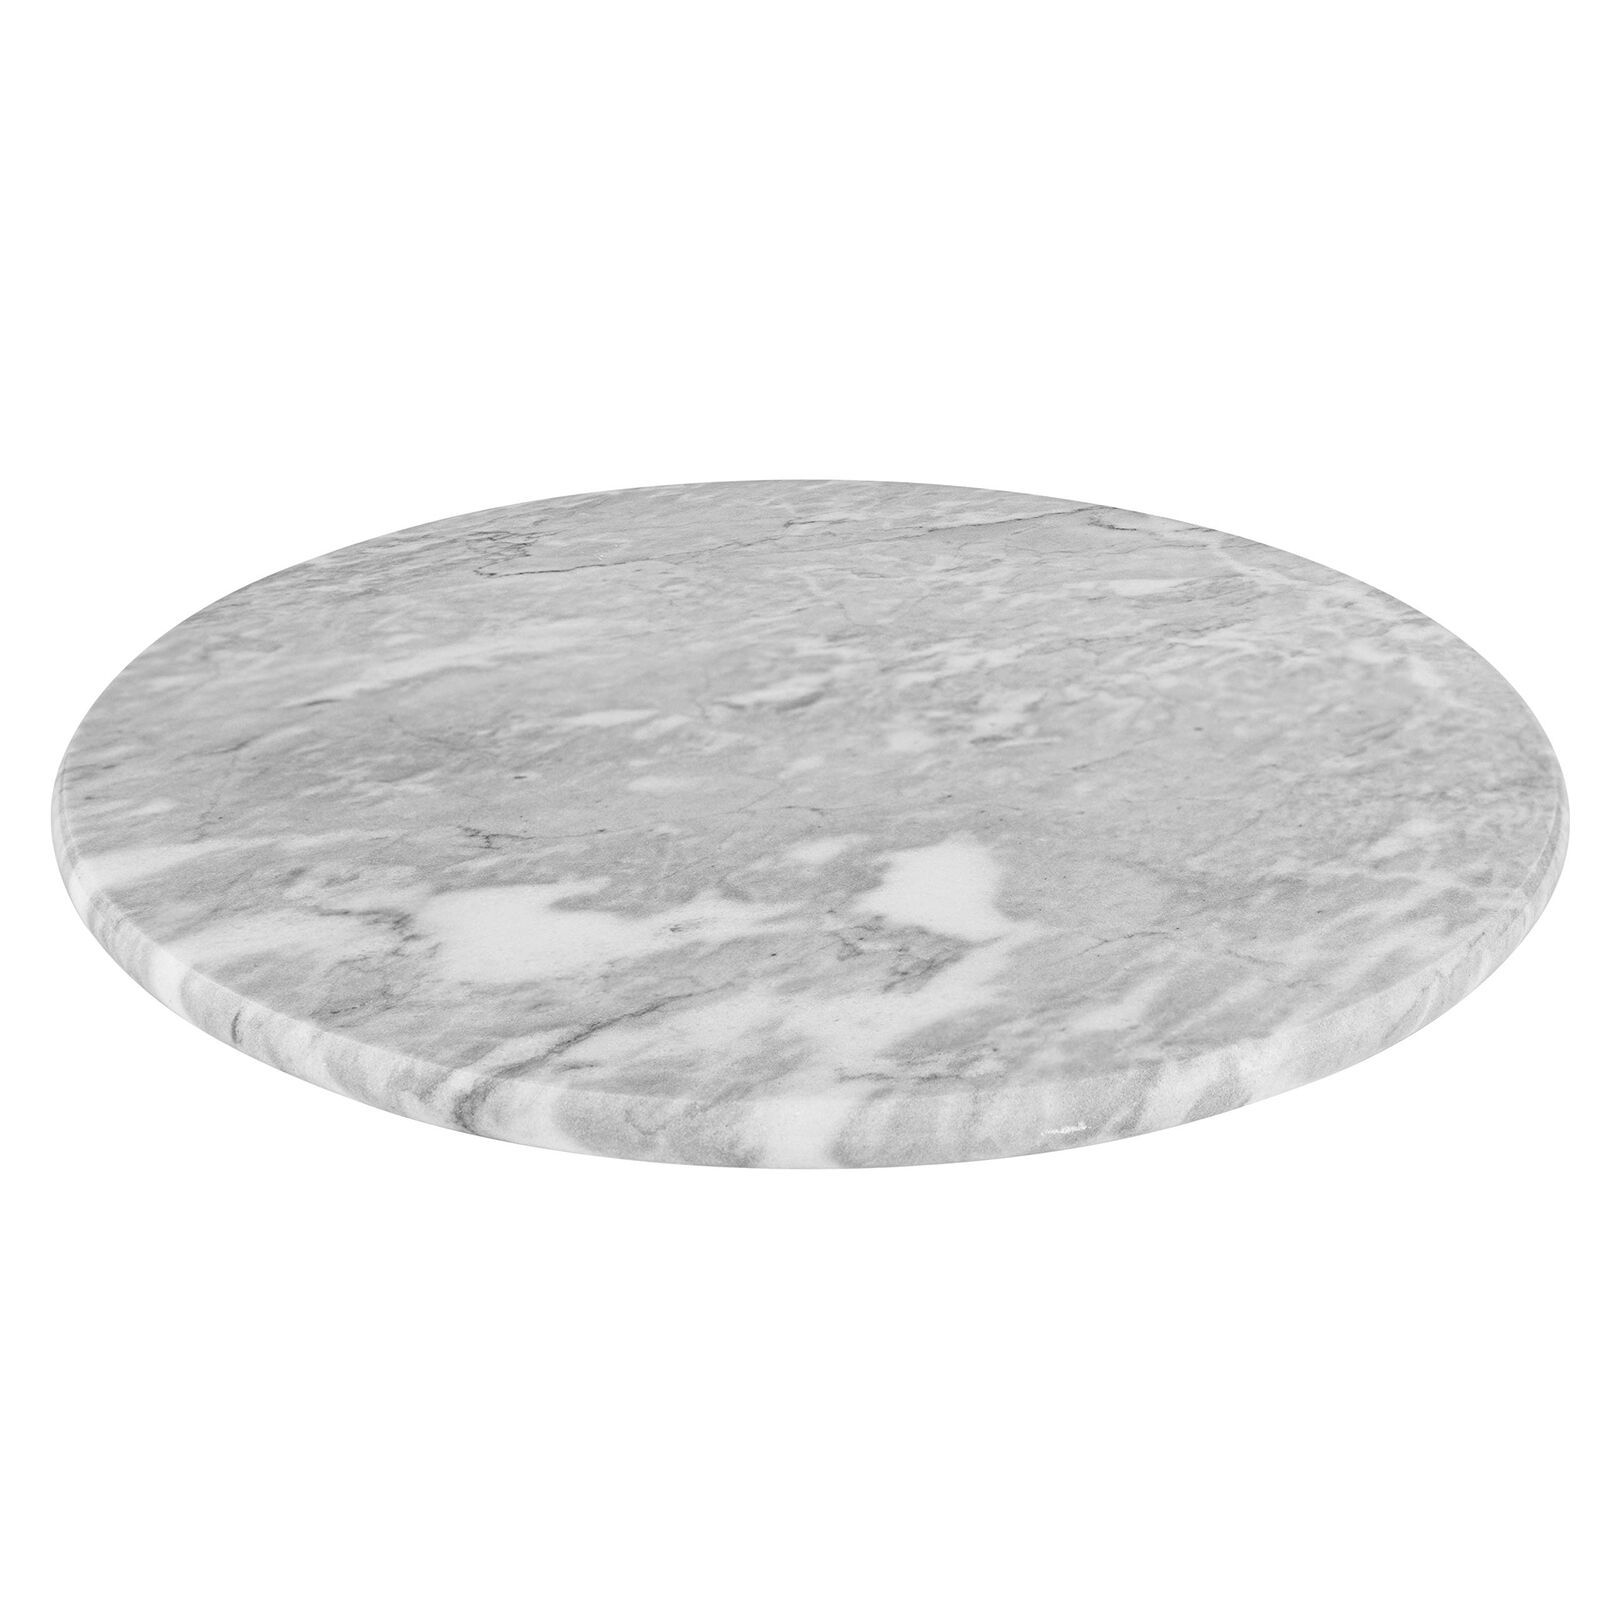 Homeries Marble round Cheese Tray Board (12 Inches) - White Elegant Serving Plat